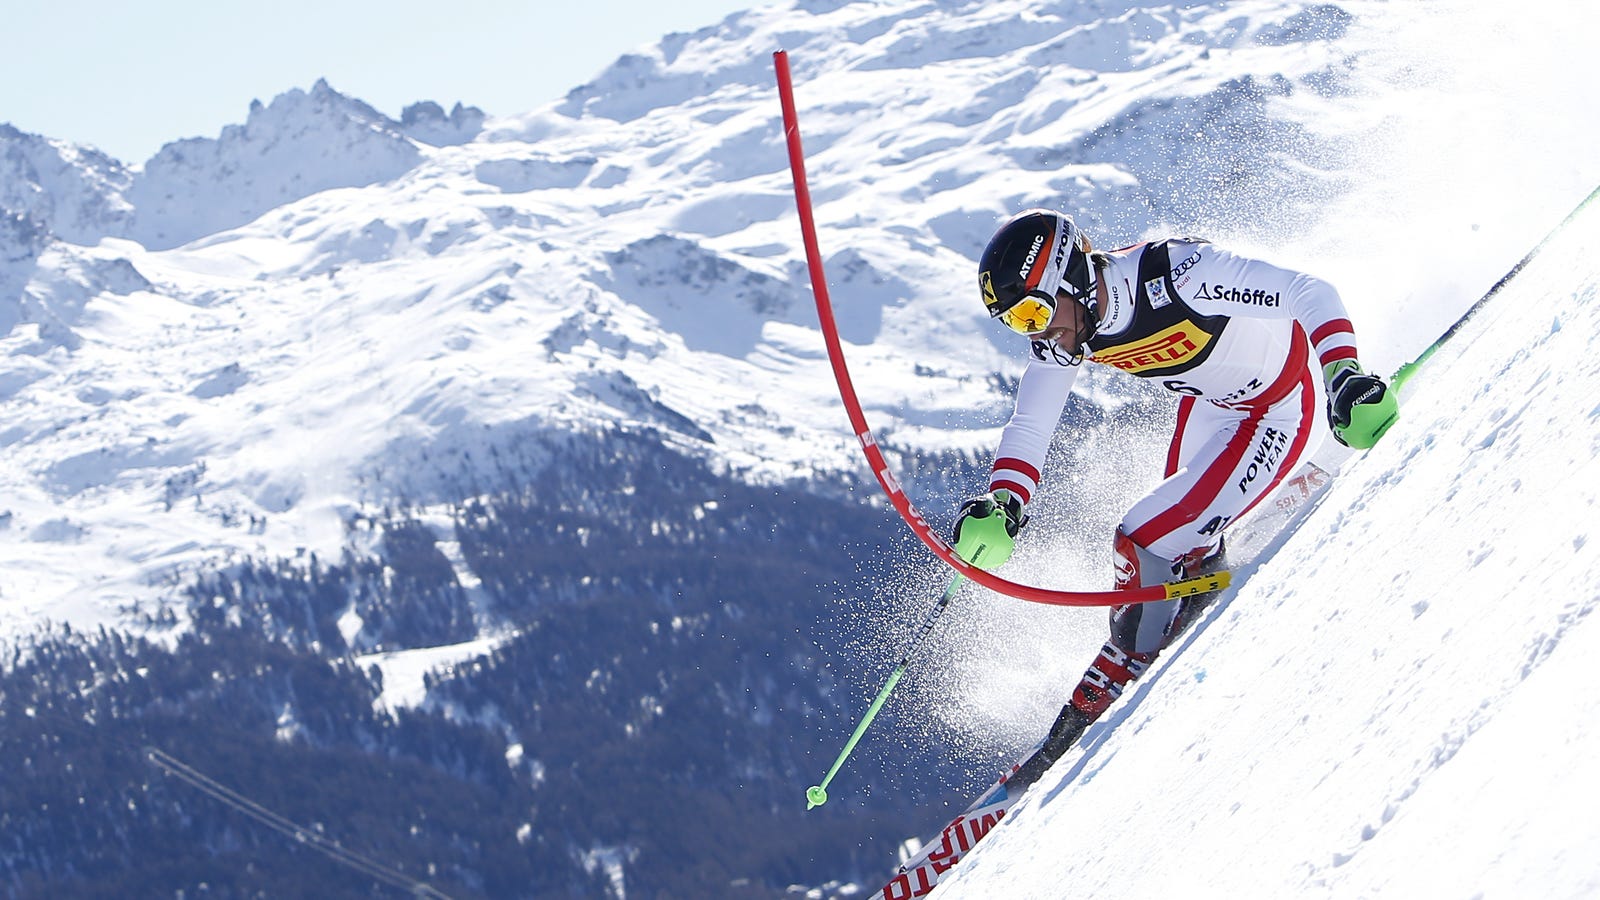 The Perfect End To The World Ski Championships Was An Emotional Slalom